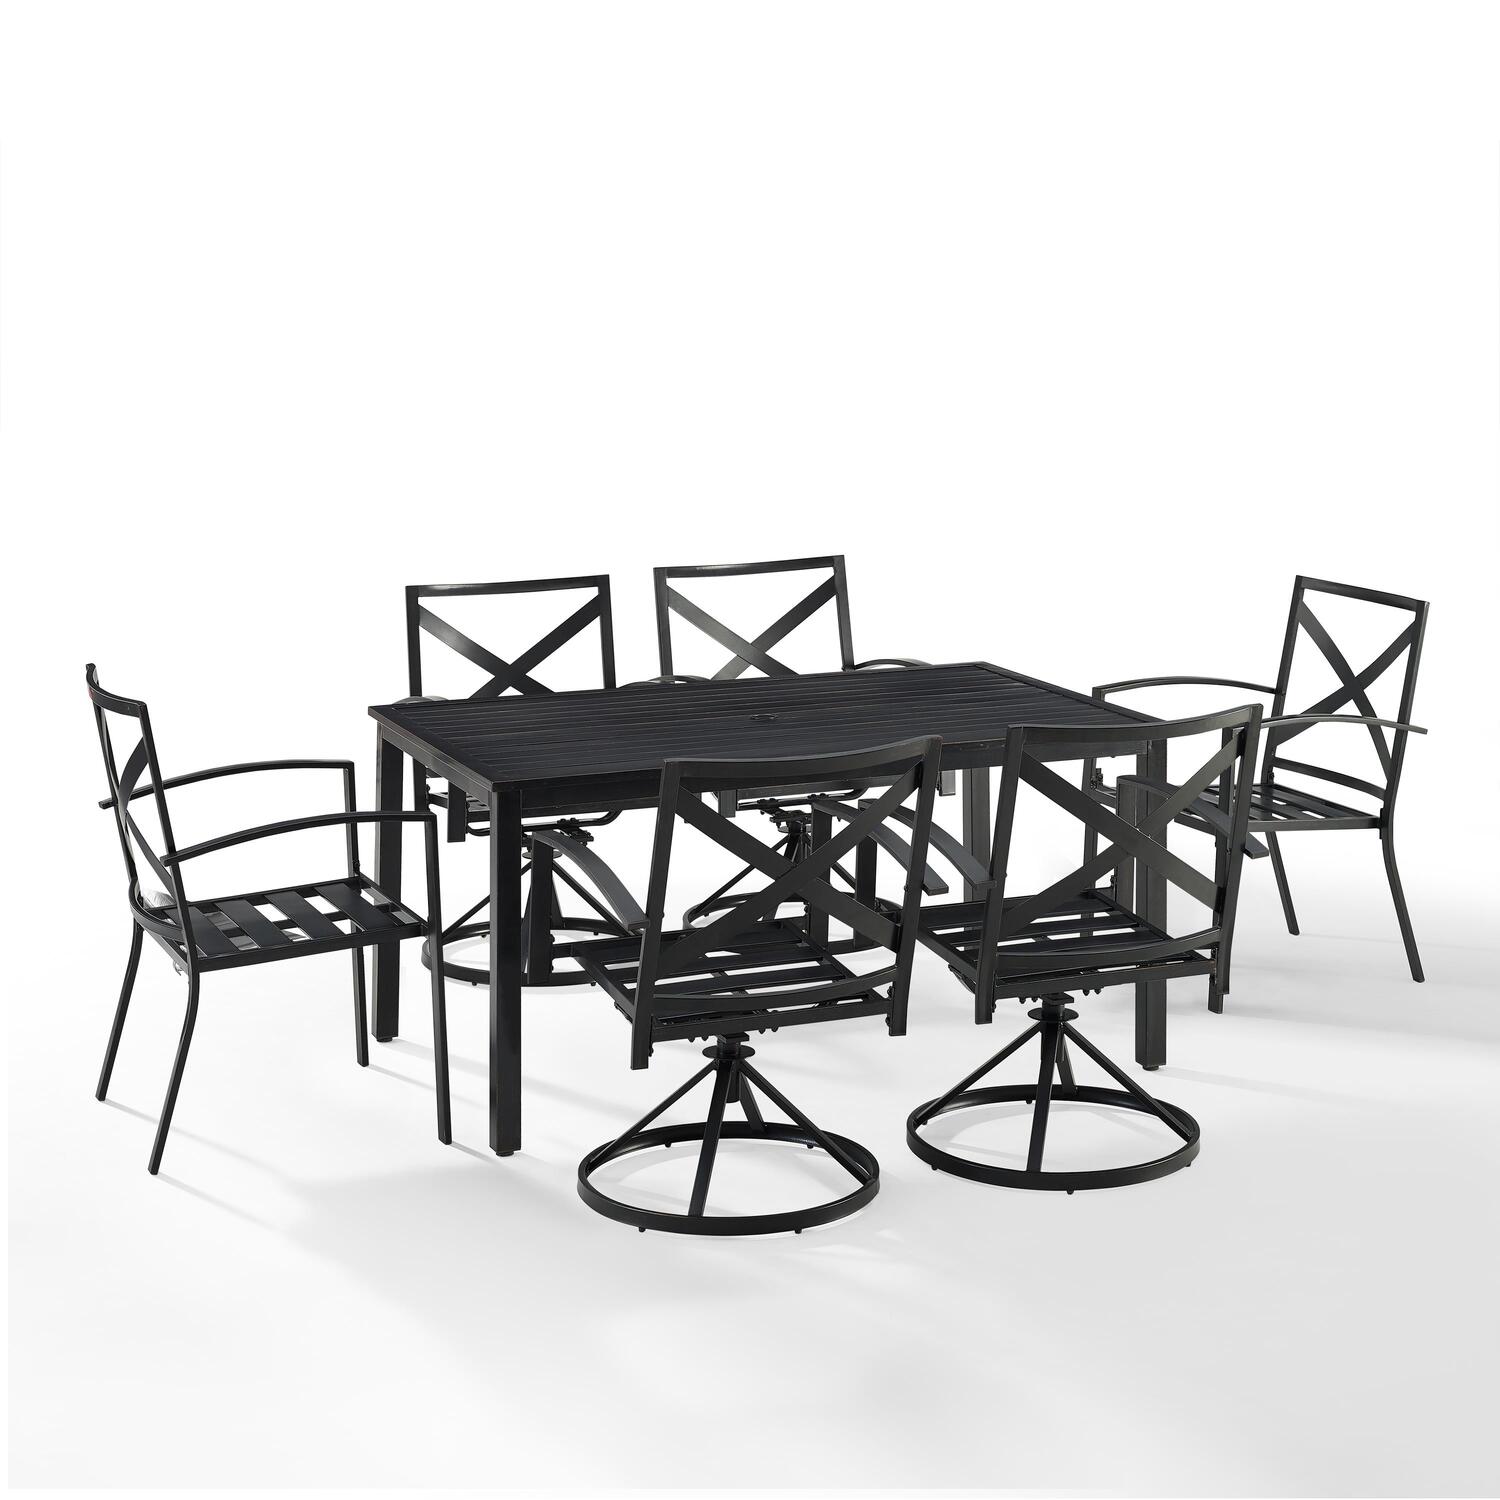 Crosley Furniture Kaplan 7Pc Outdoor Dining Set in Oil Rubbed Bronze/Oatmeal - image 3 of 10